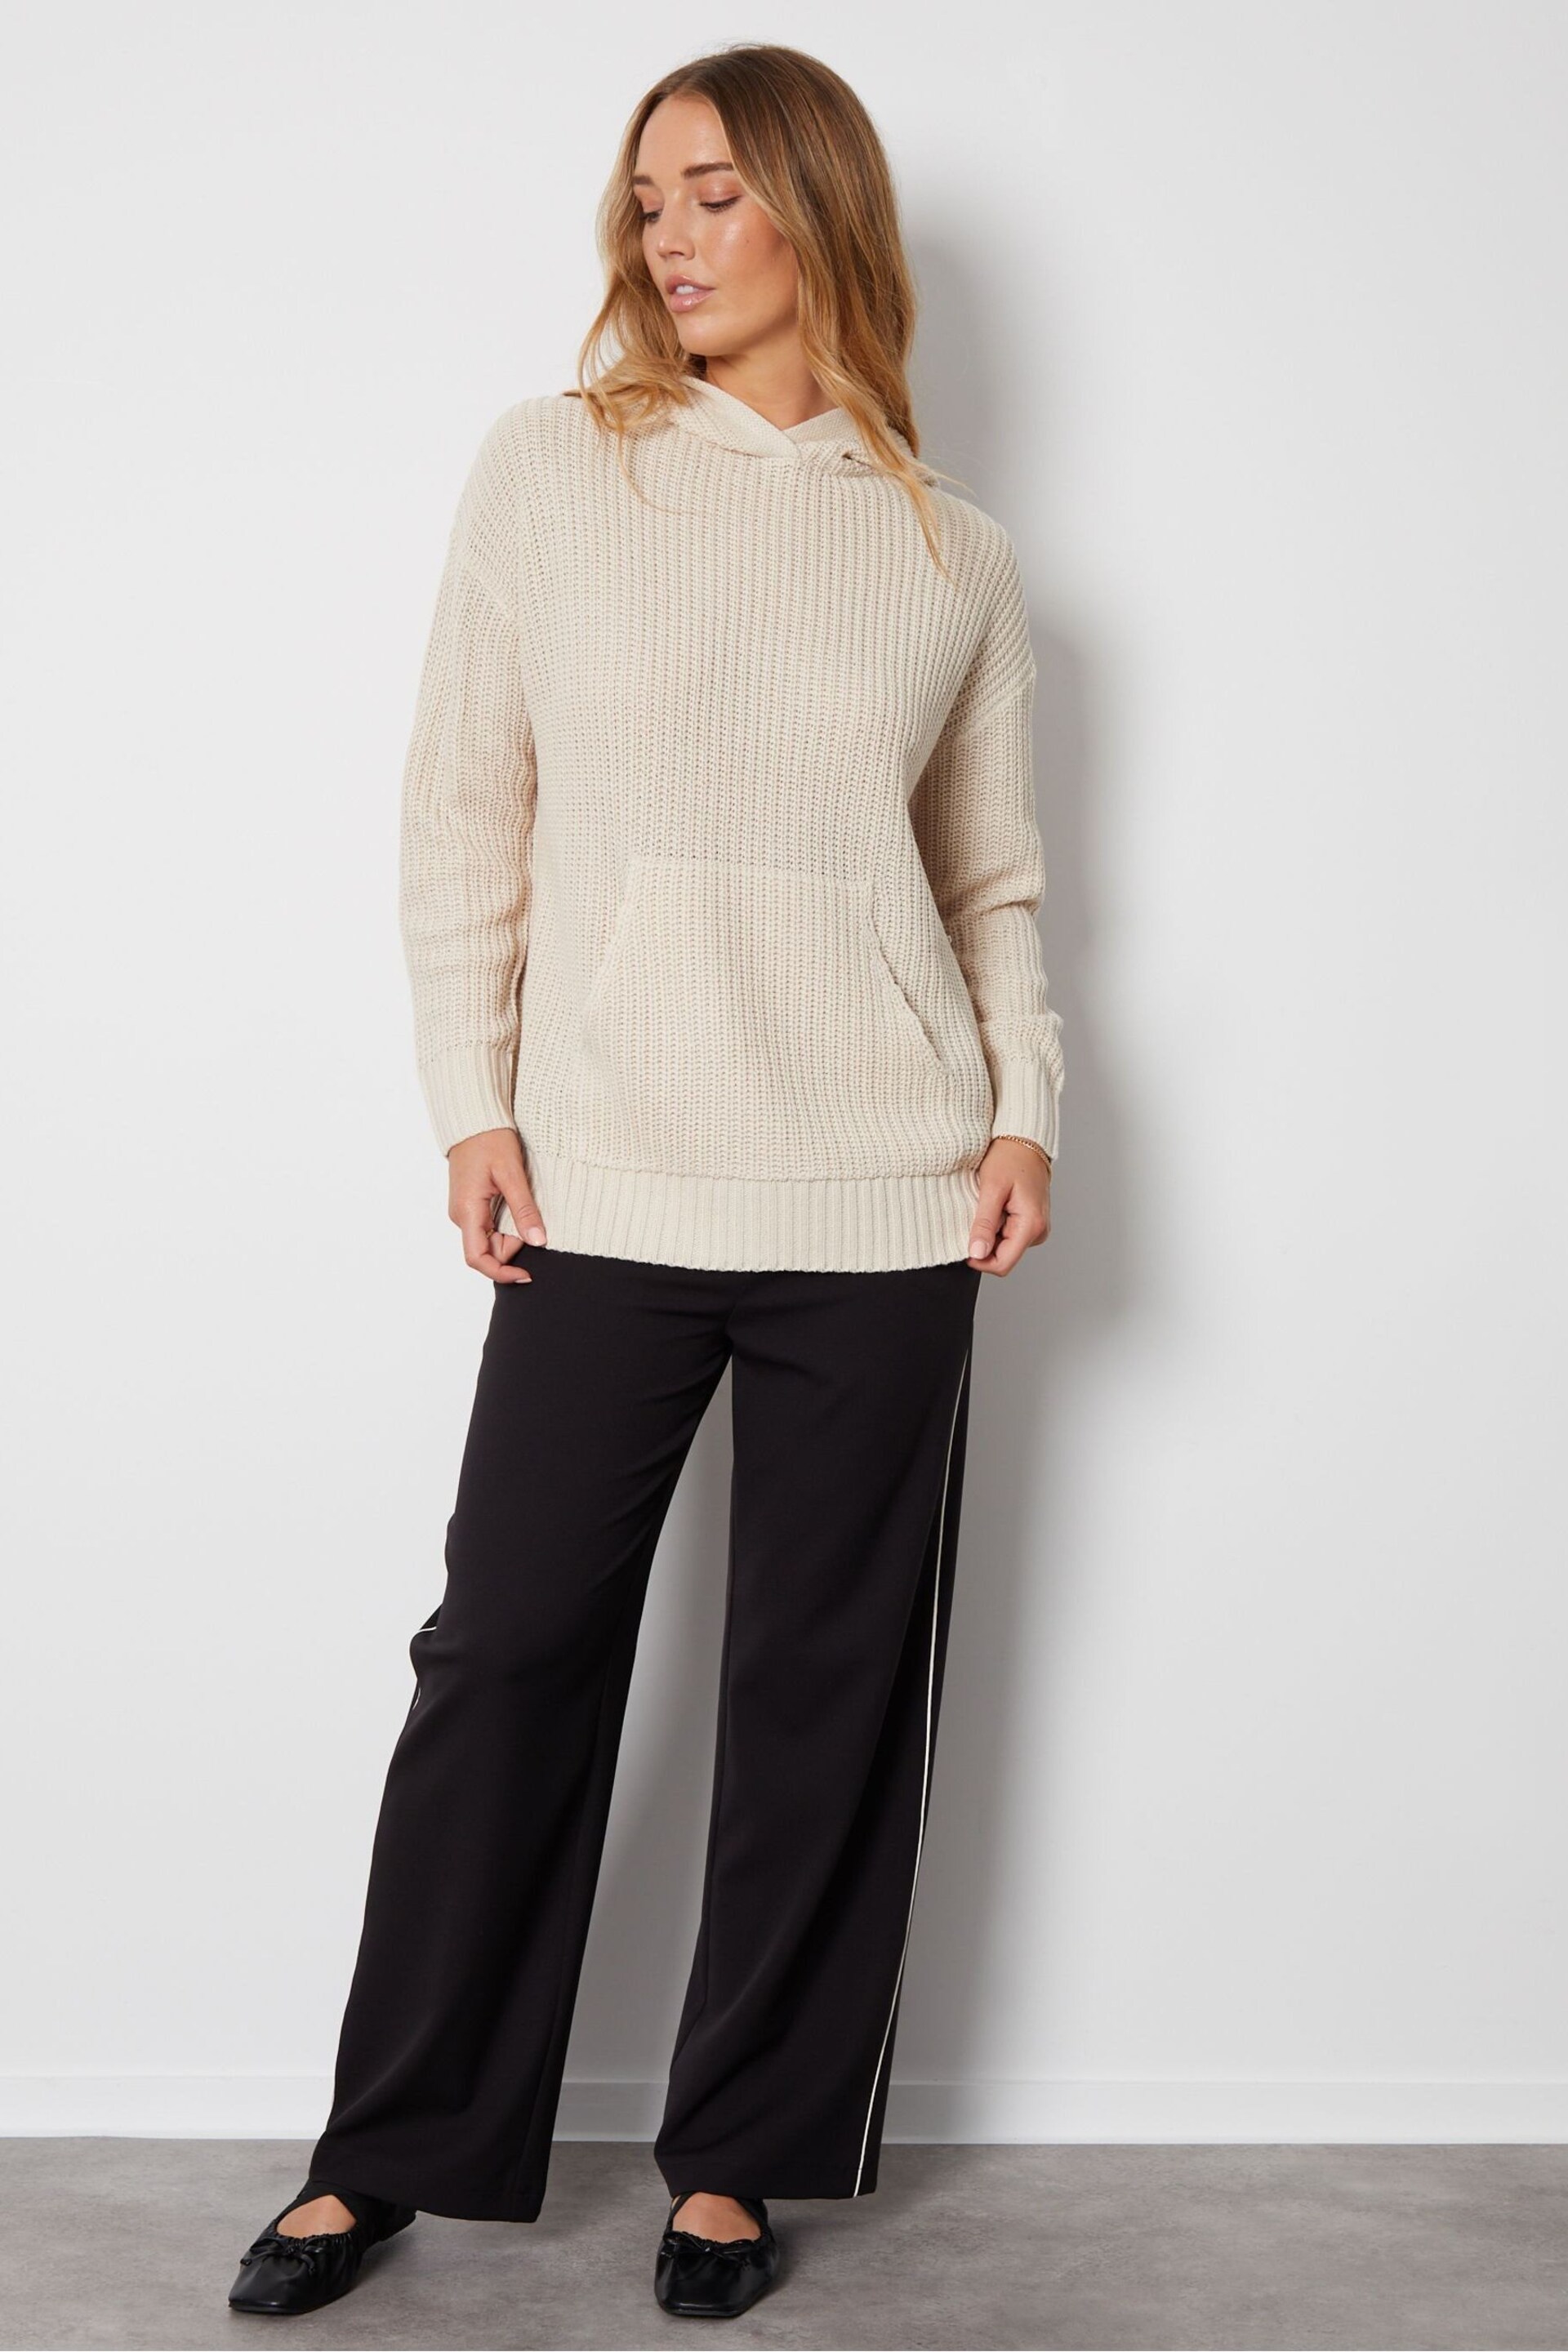 Threadbare Brown Hooded Knitted Jumper - Image 3 of 5